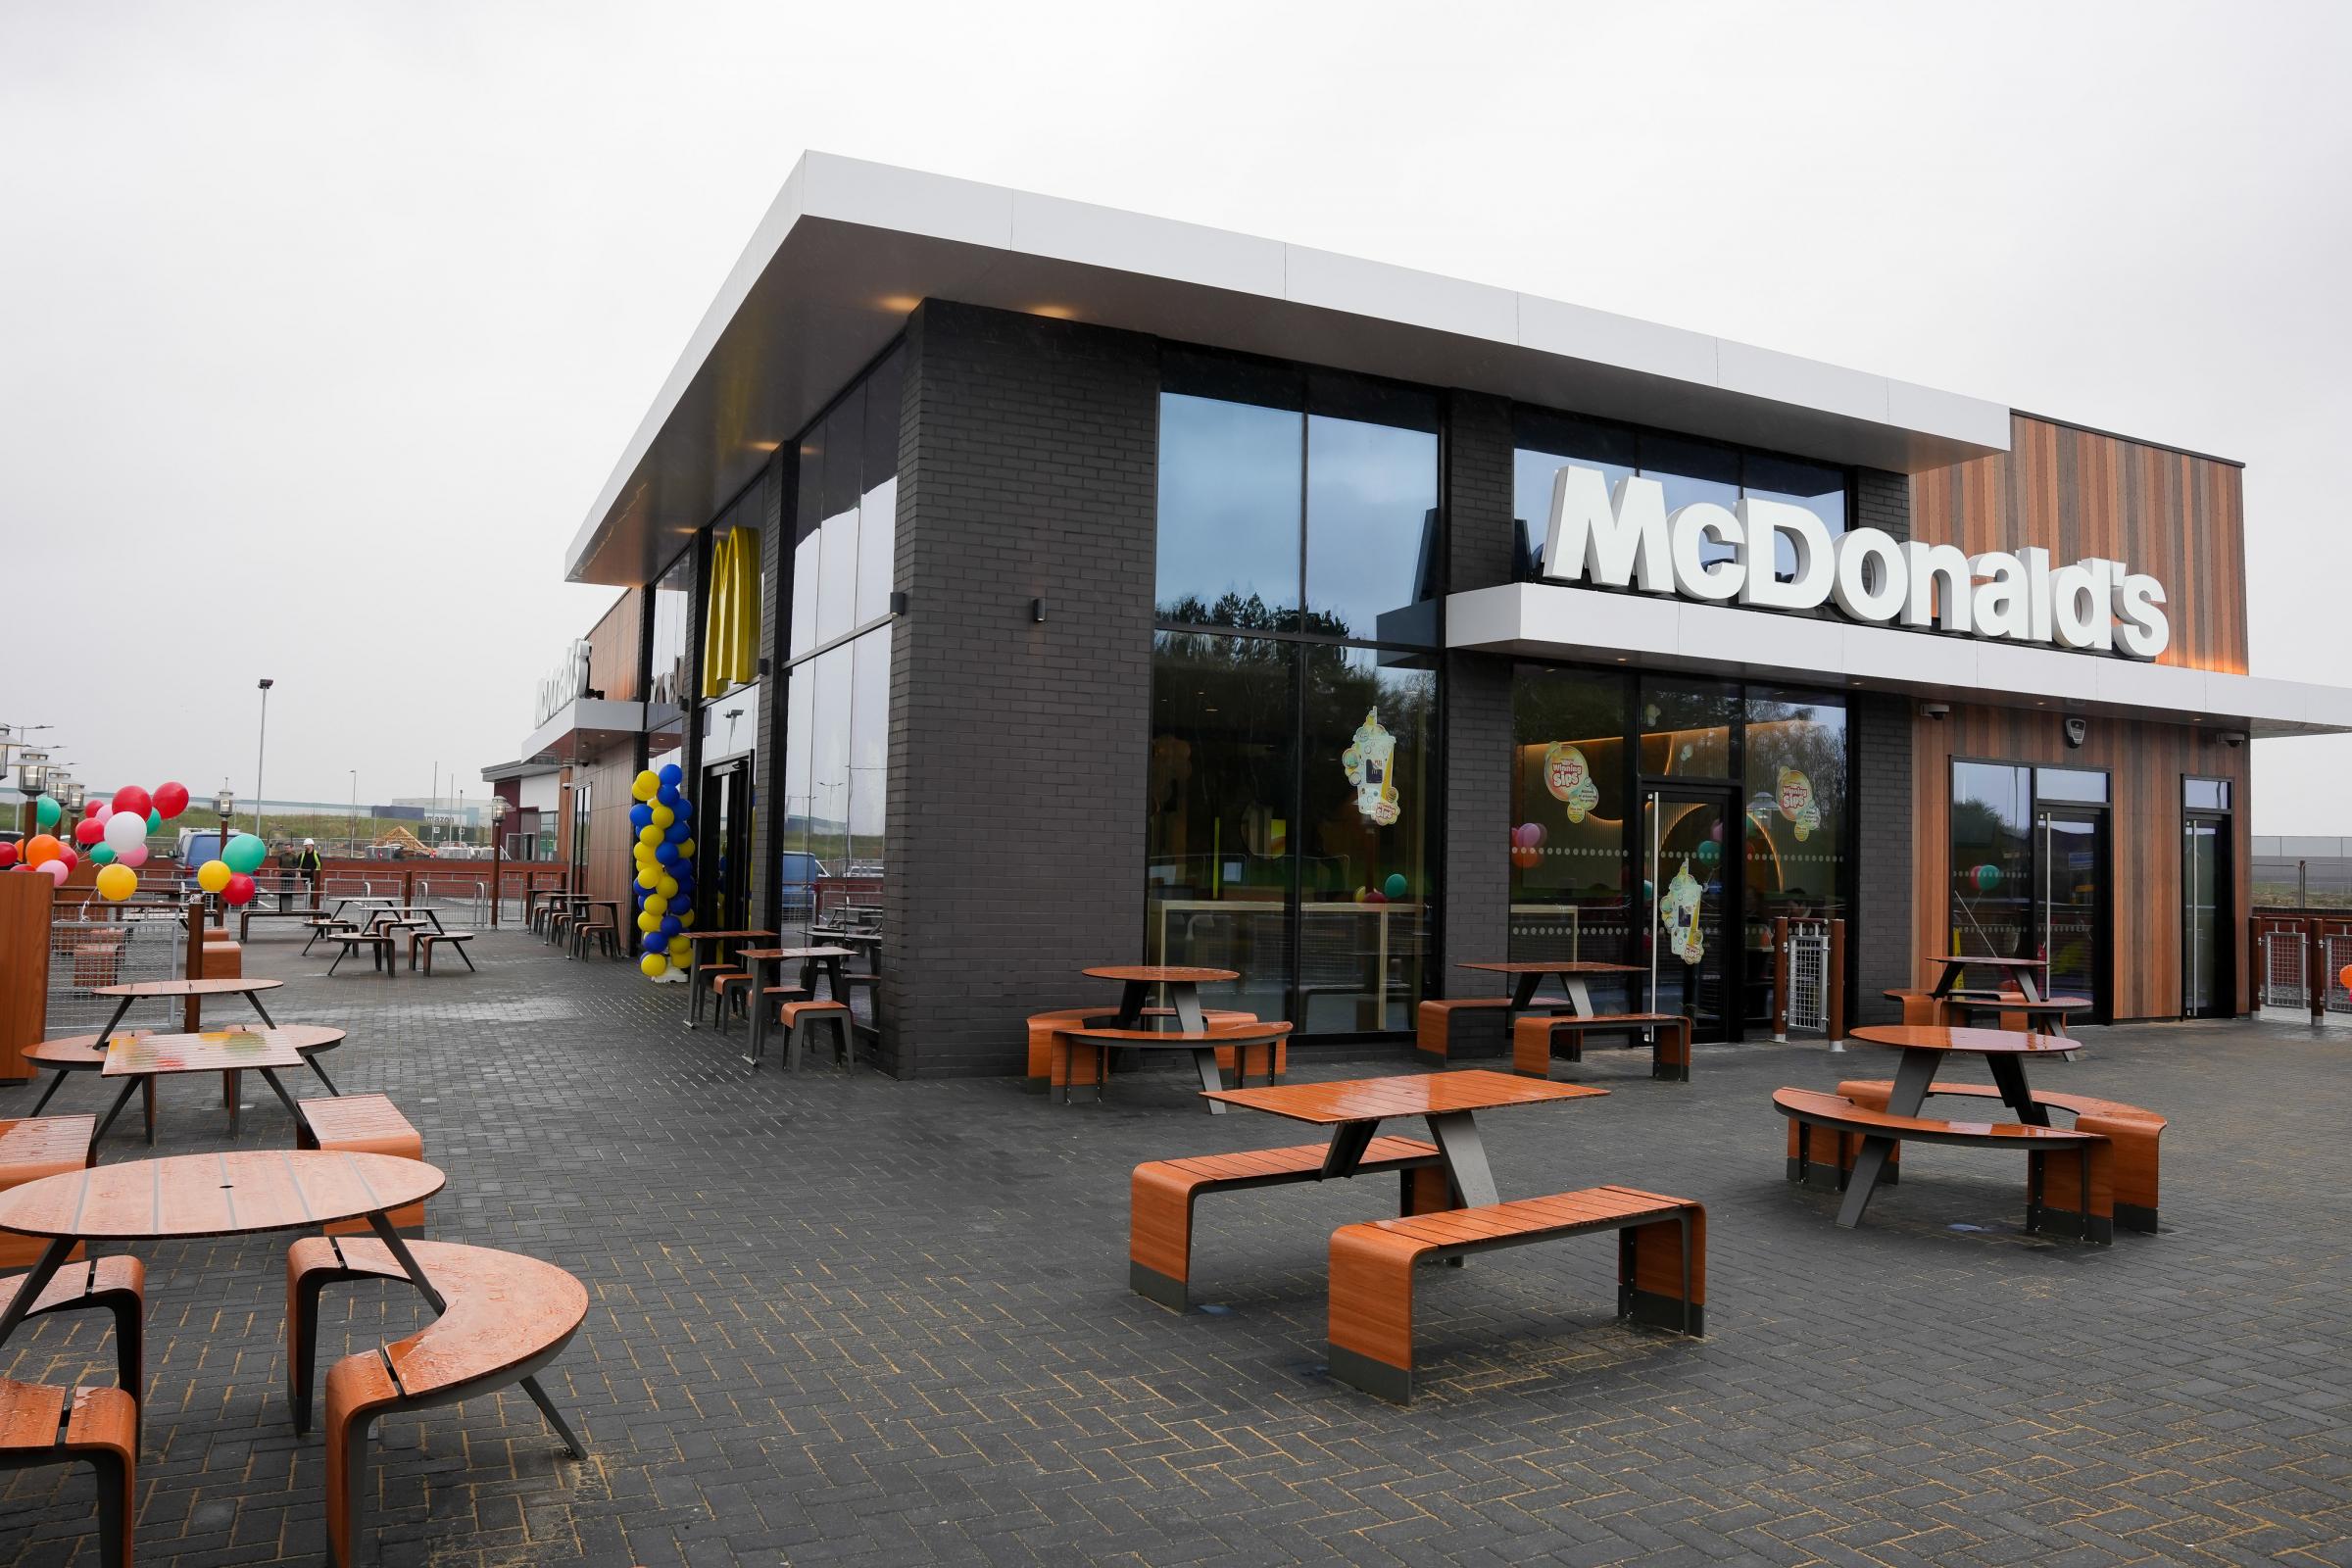 First look inside the new McDonald’s restaurant which has opened at Omega retail park